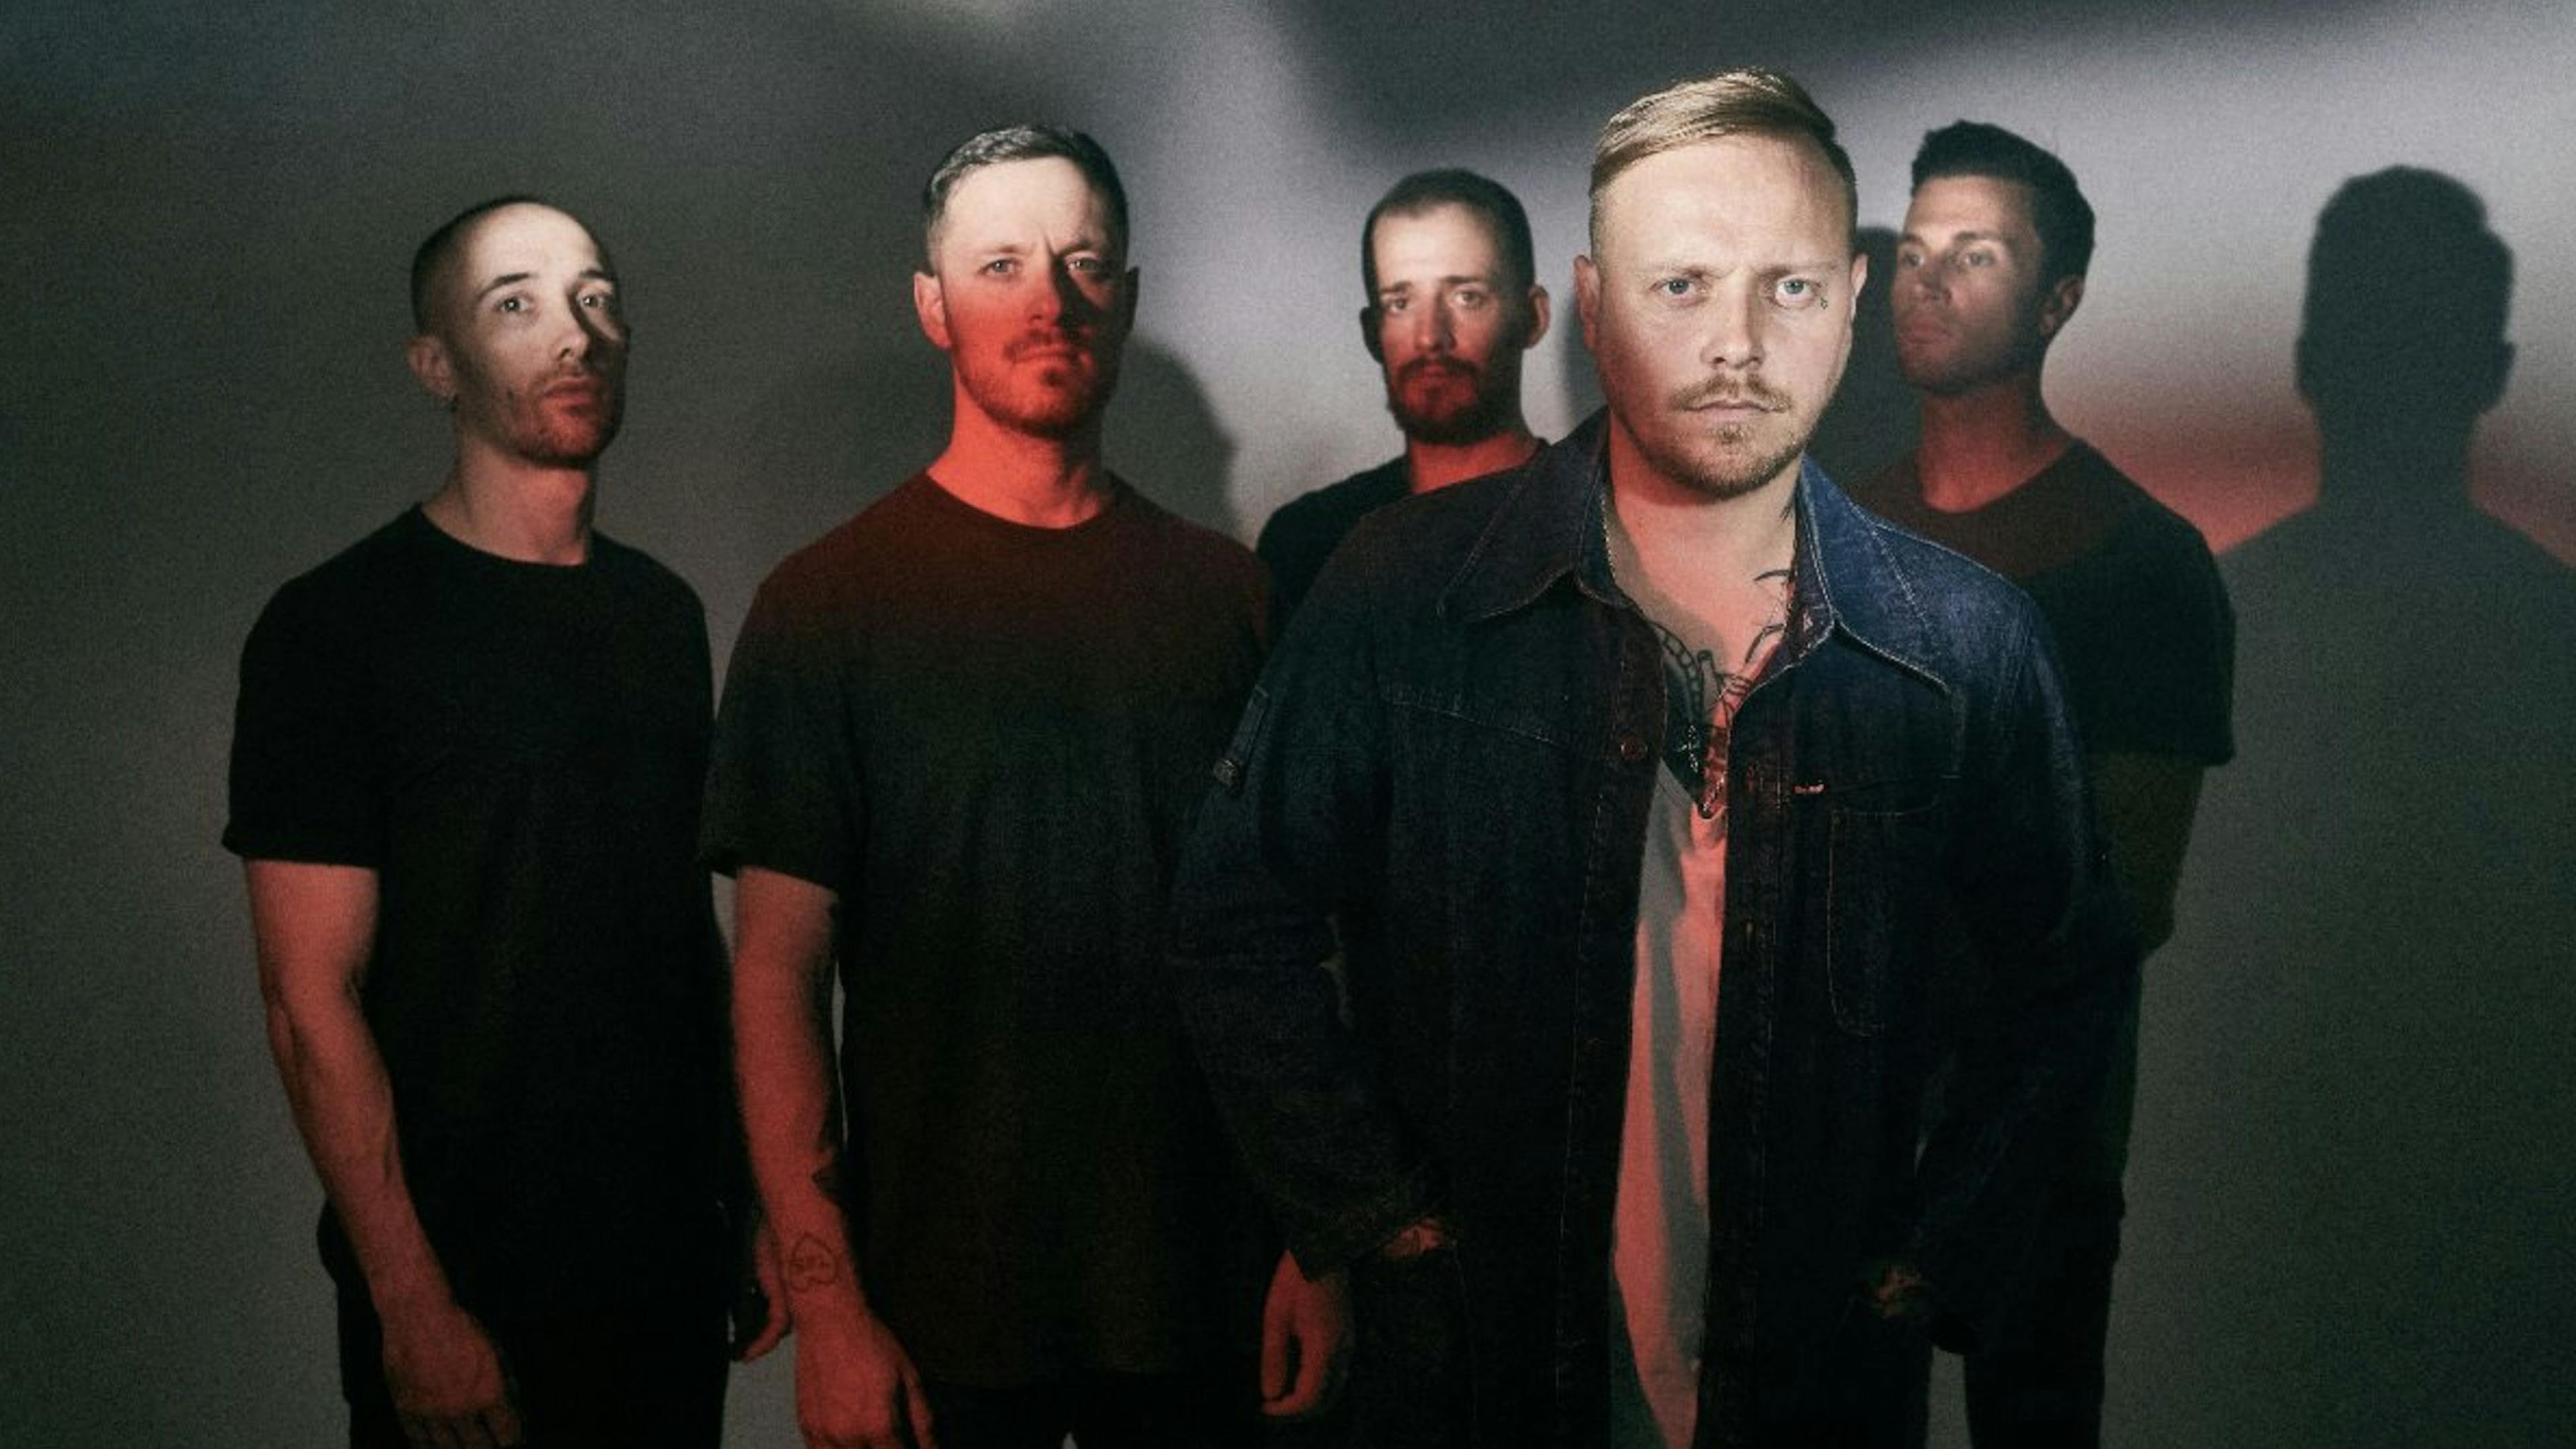 Architects have unleashed a stunning new single and video, Dead Butterflies